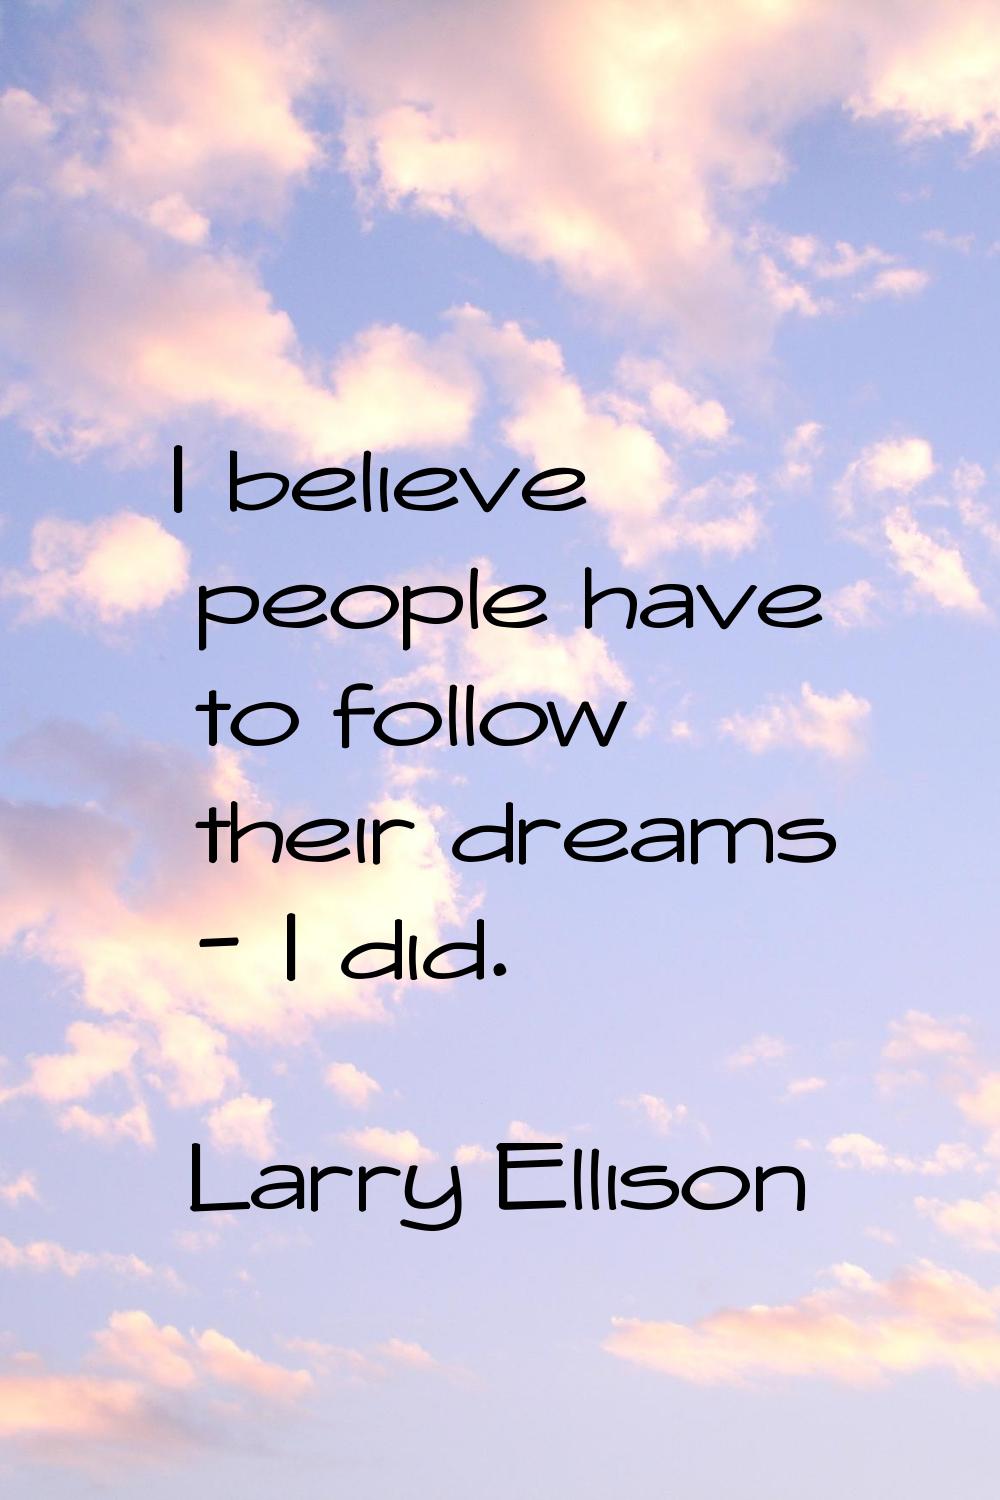 I believe people have to follow their dreams - I did.